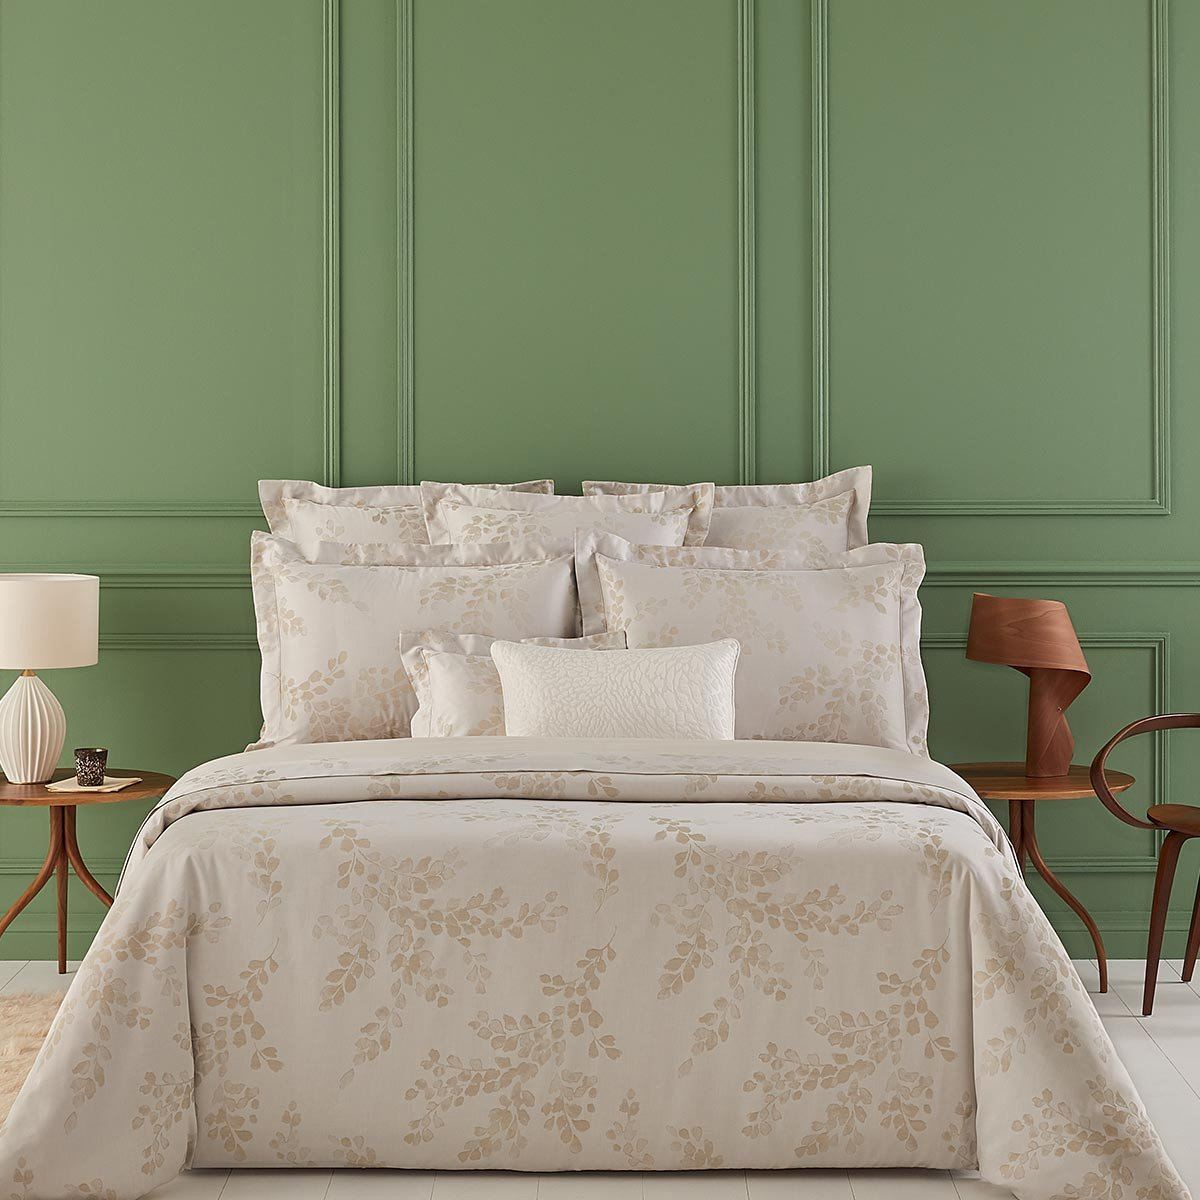 https://cdn.shopify.com/s/files/1/1268/4551/products/fig-linens-yves-delorme-murmures-bedding.jpg?v=1645062476